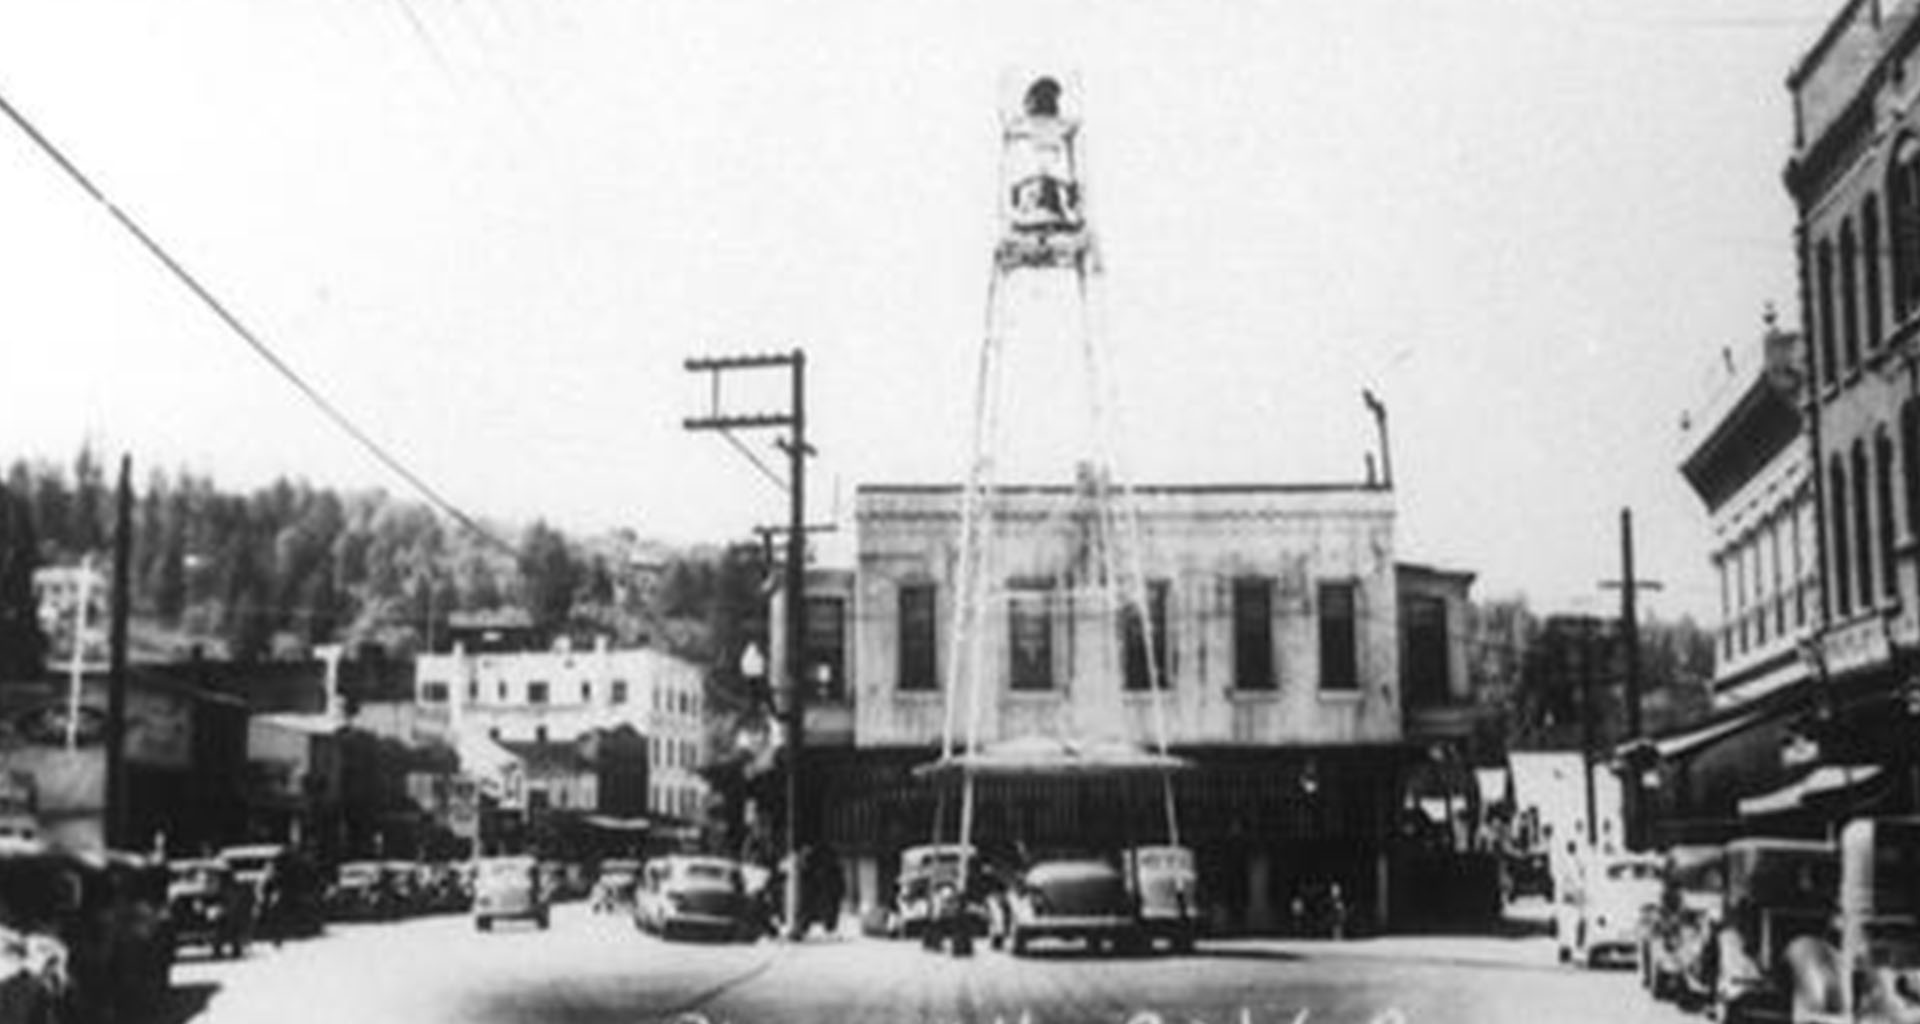 Local Appreciation Series: Getting to Know Placerville